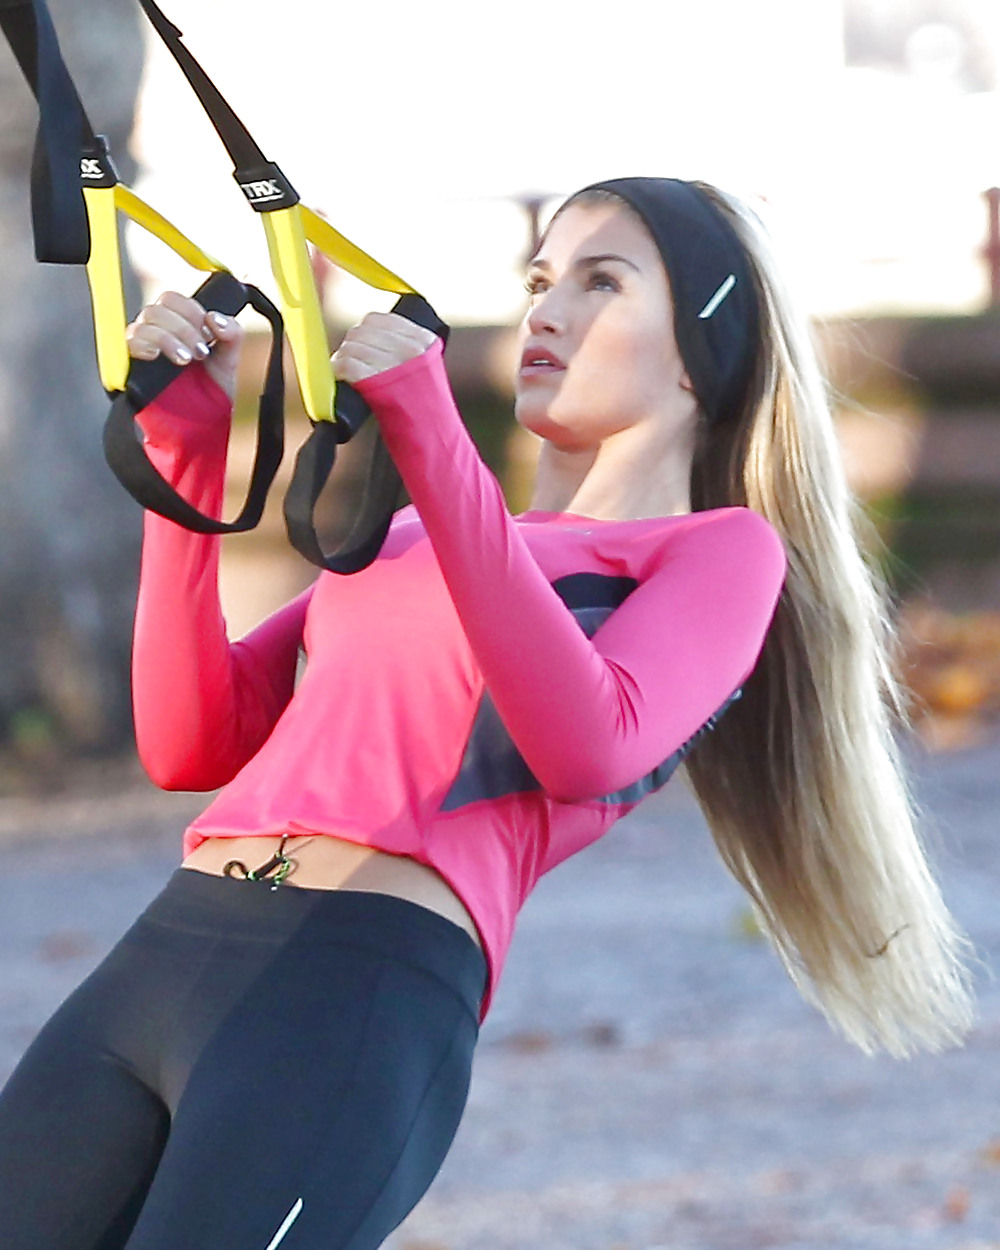 Amy Willerton - Knows How To Stretch! #23685293